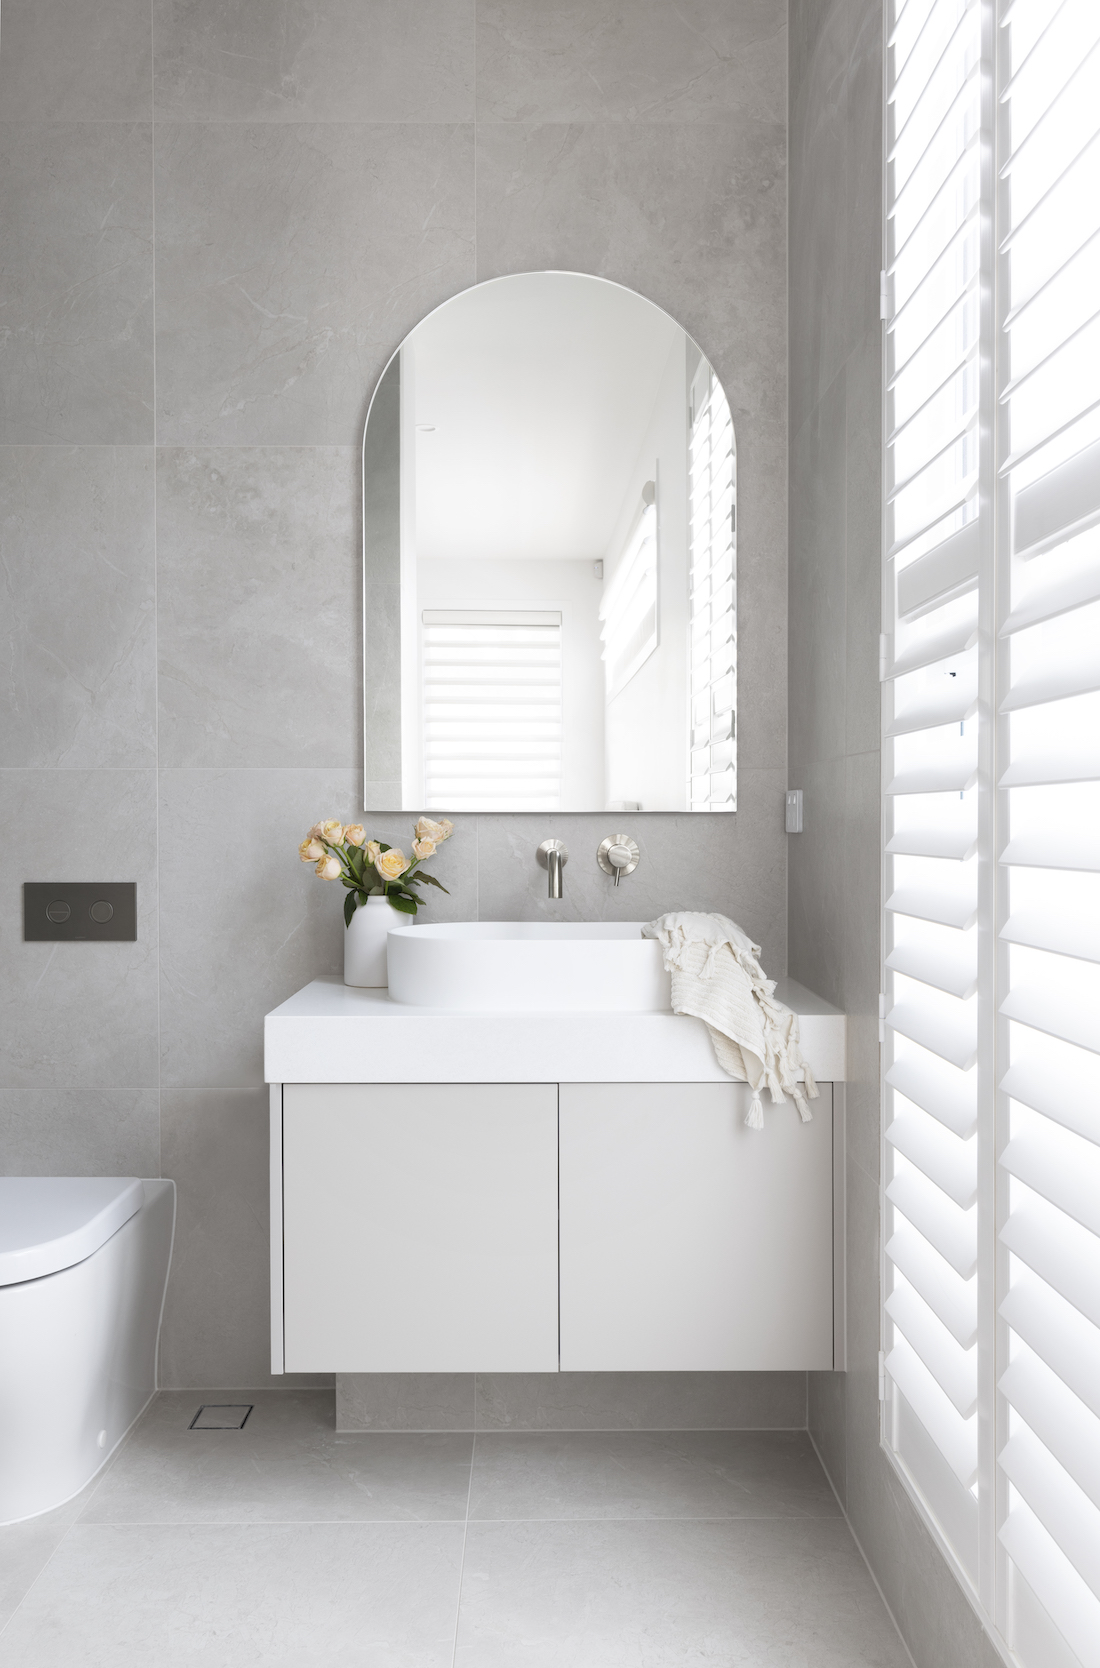 Ensuite bathroom with white vanity and arch mirror